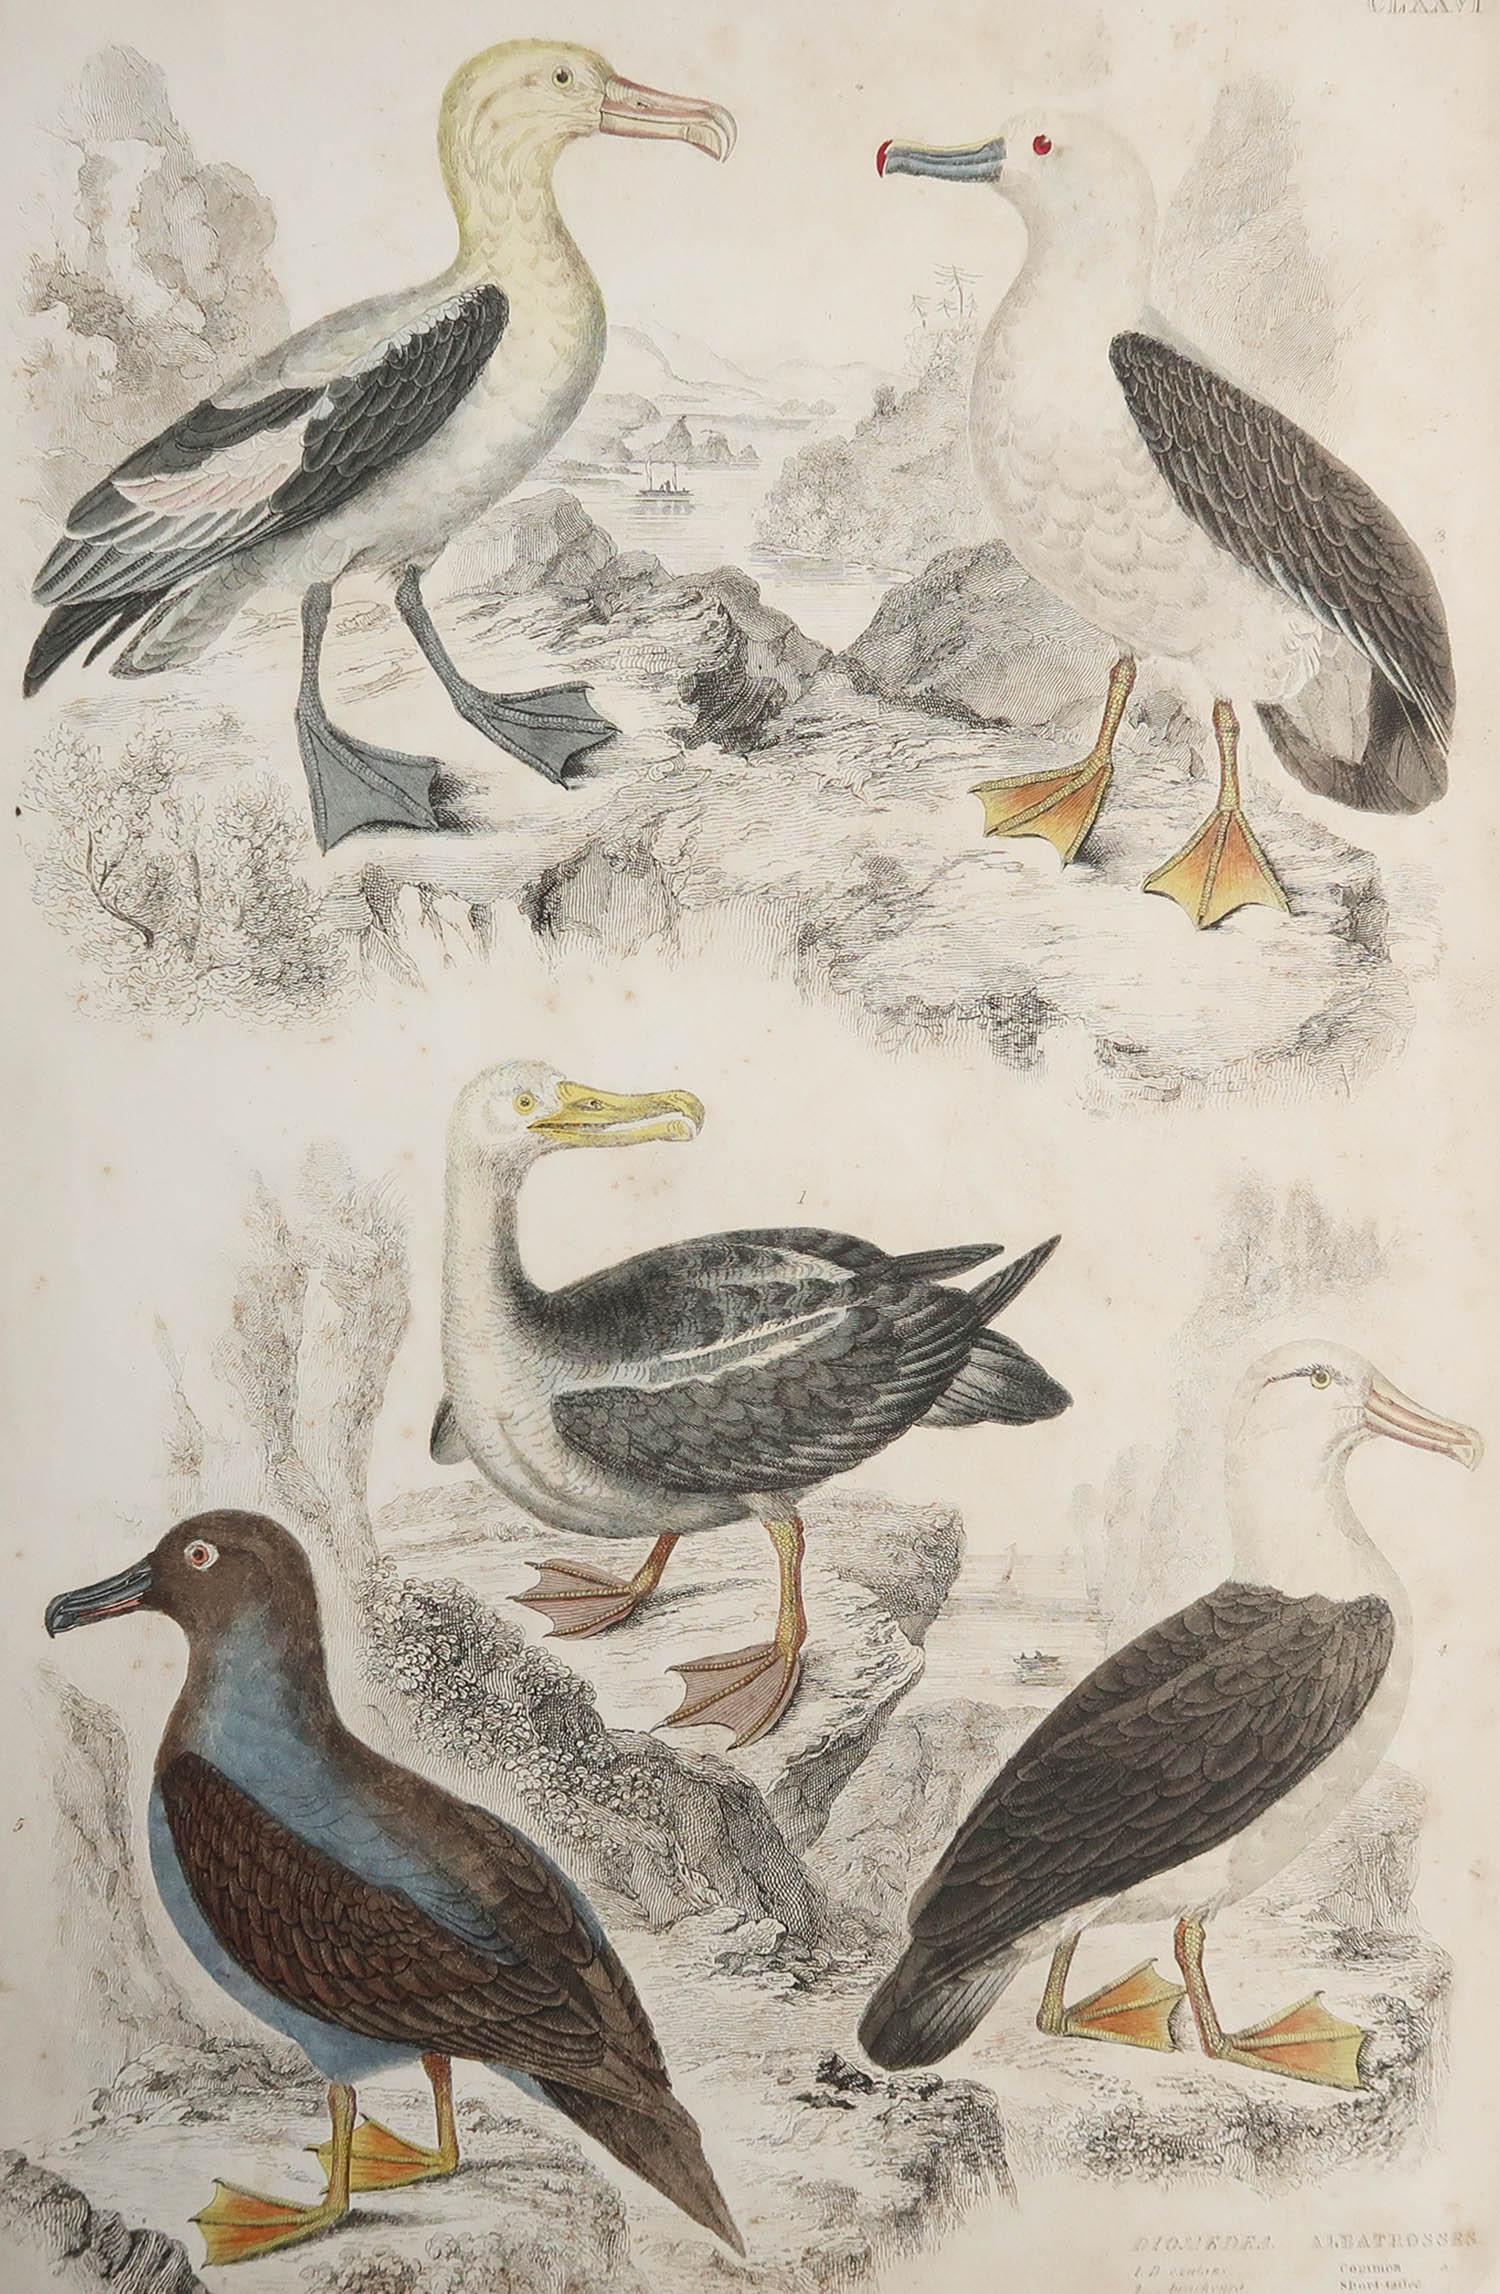 Great image of seagulls

Unframed. It gives you the option of perhaps making a set up using your own choice of frames.

Lithograph after Cpt. Brown and Marechal with original hand color.

Published circa 1835

Free shipping.




